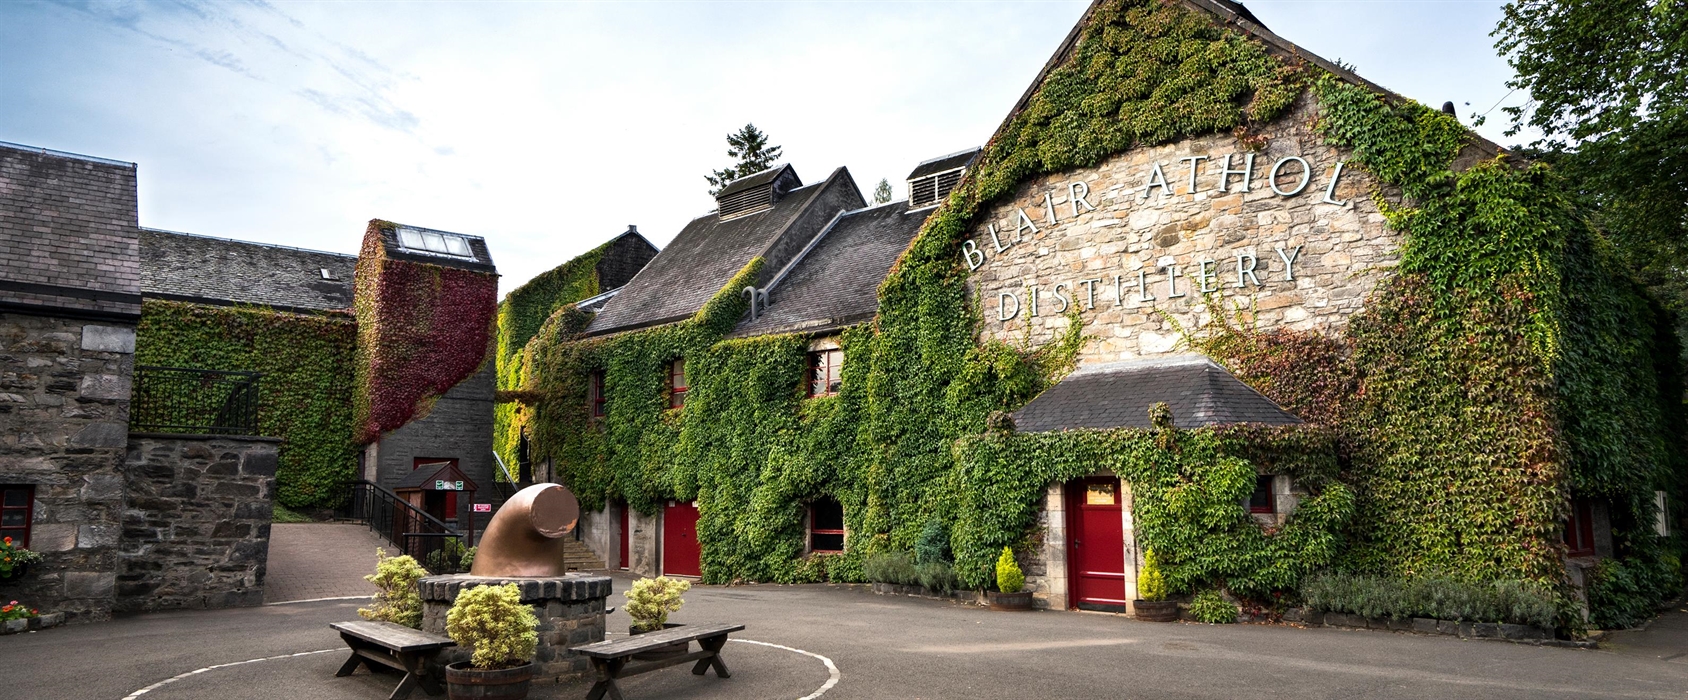 whisky distillery tour pitlochry